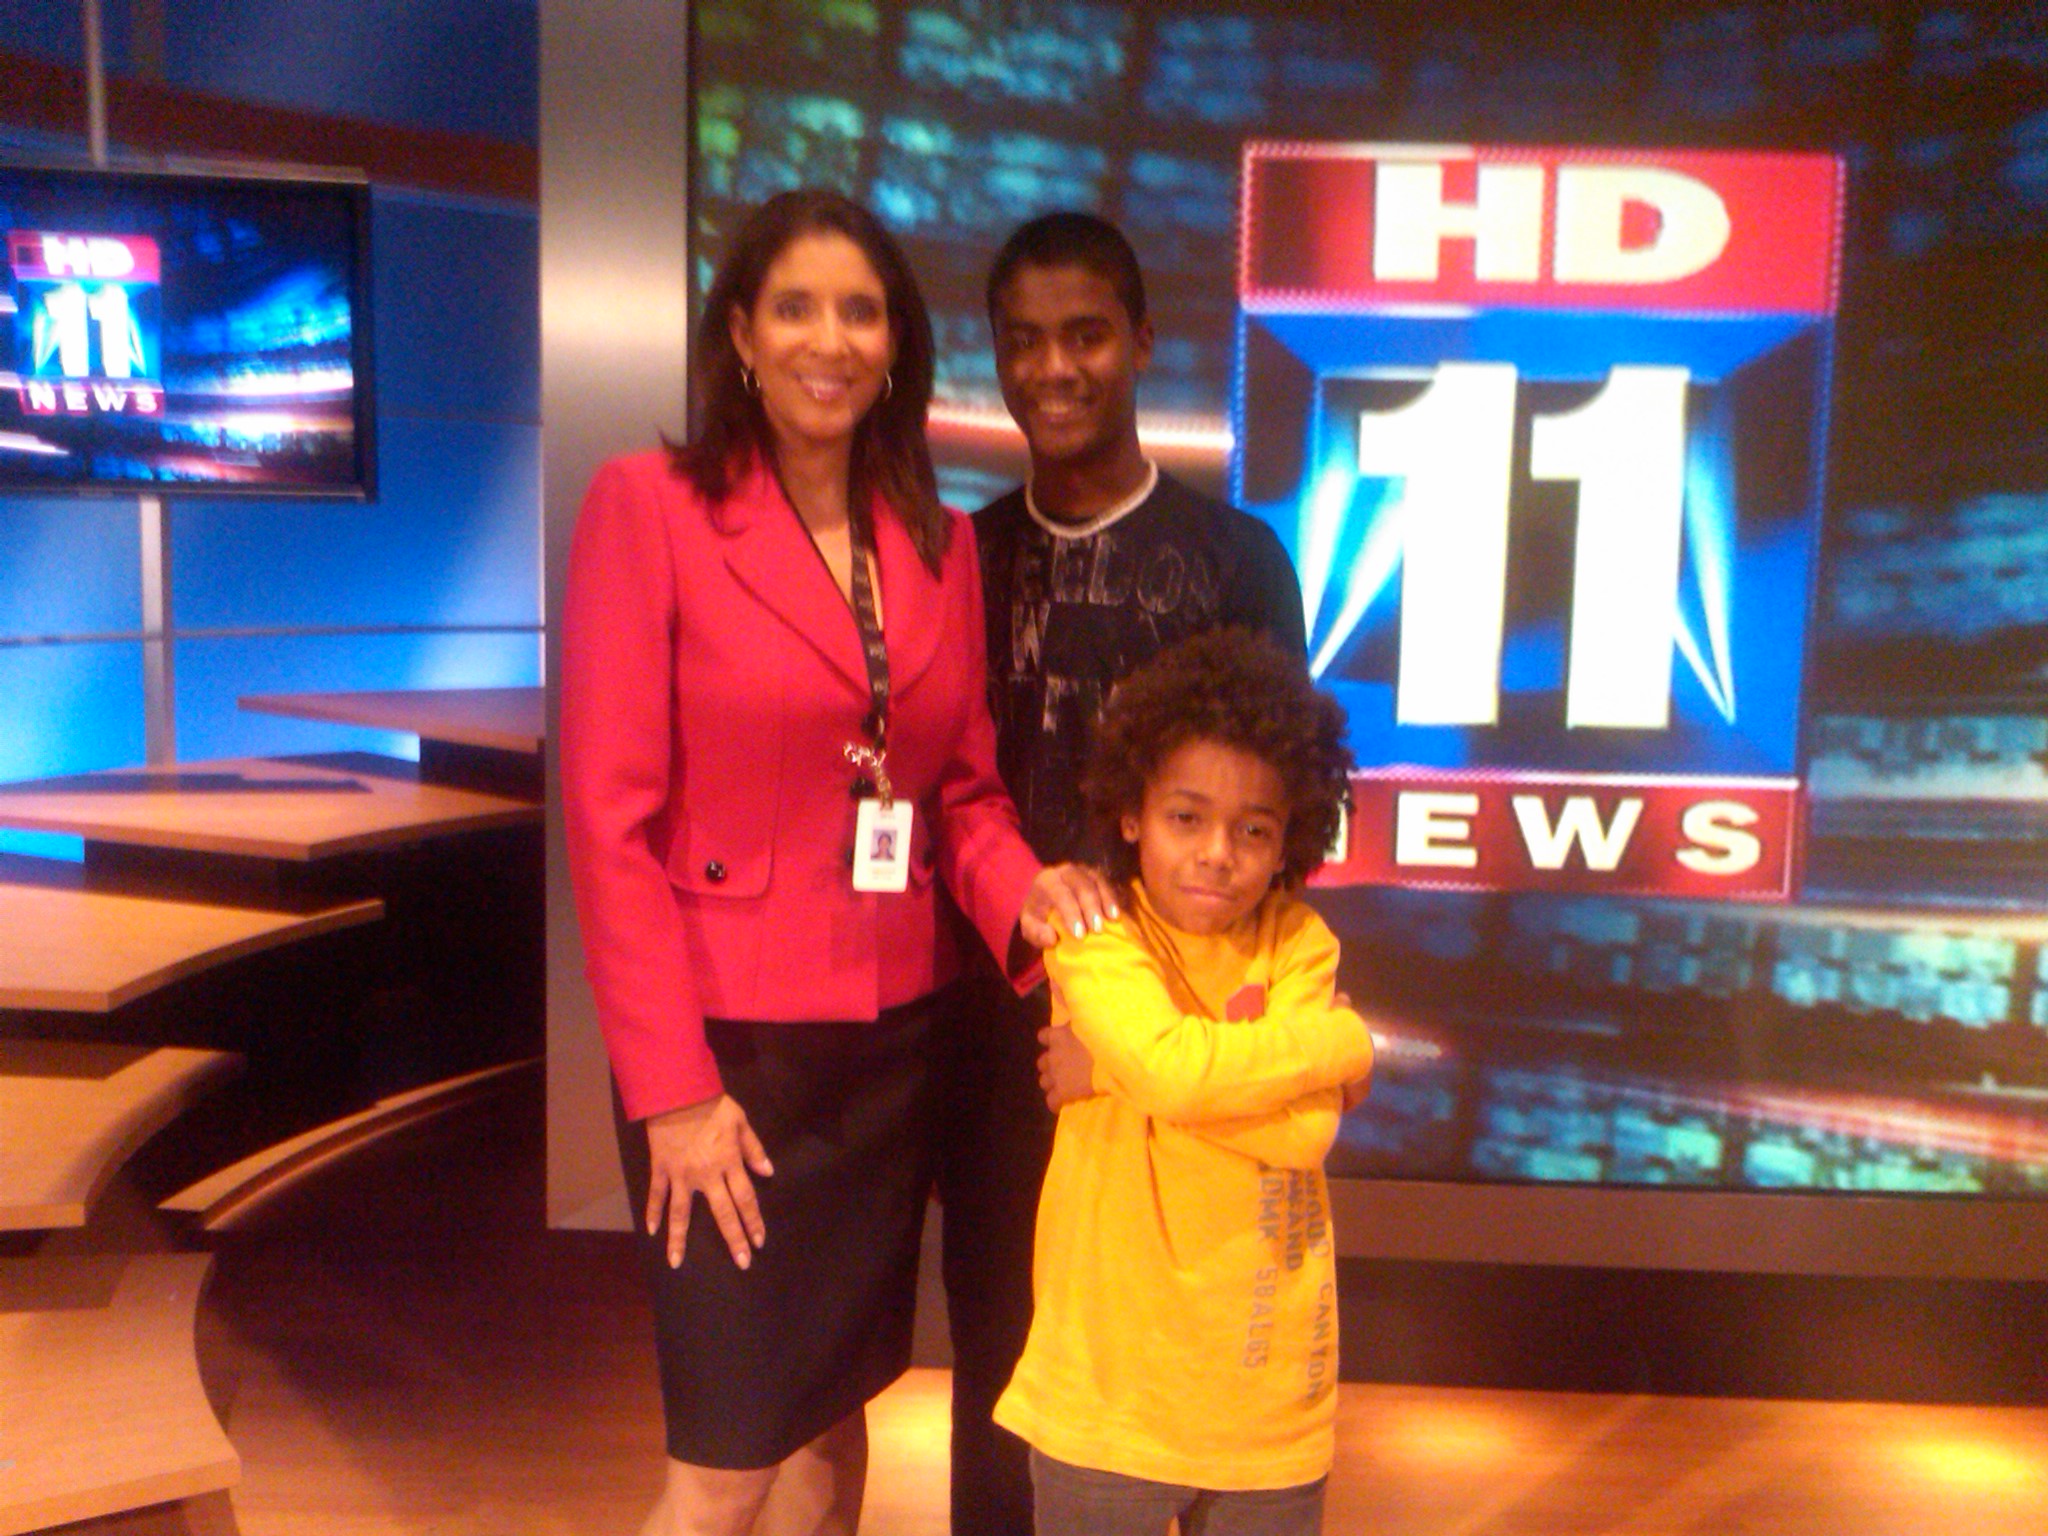 Hanging out in the News room with my brother Darnell and Ms. Christine Devine.